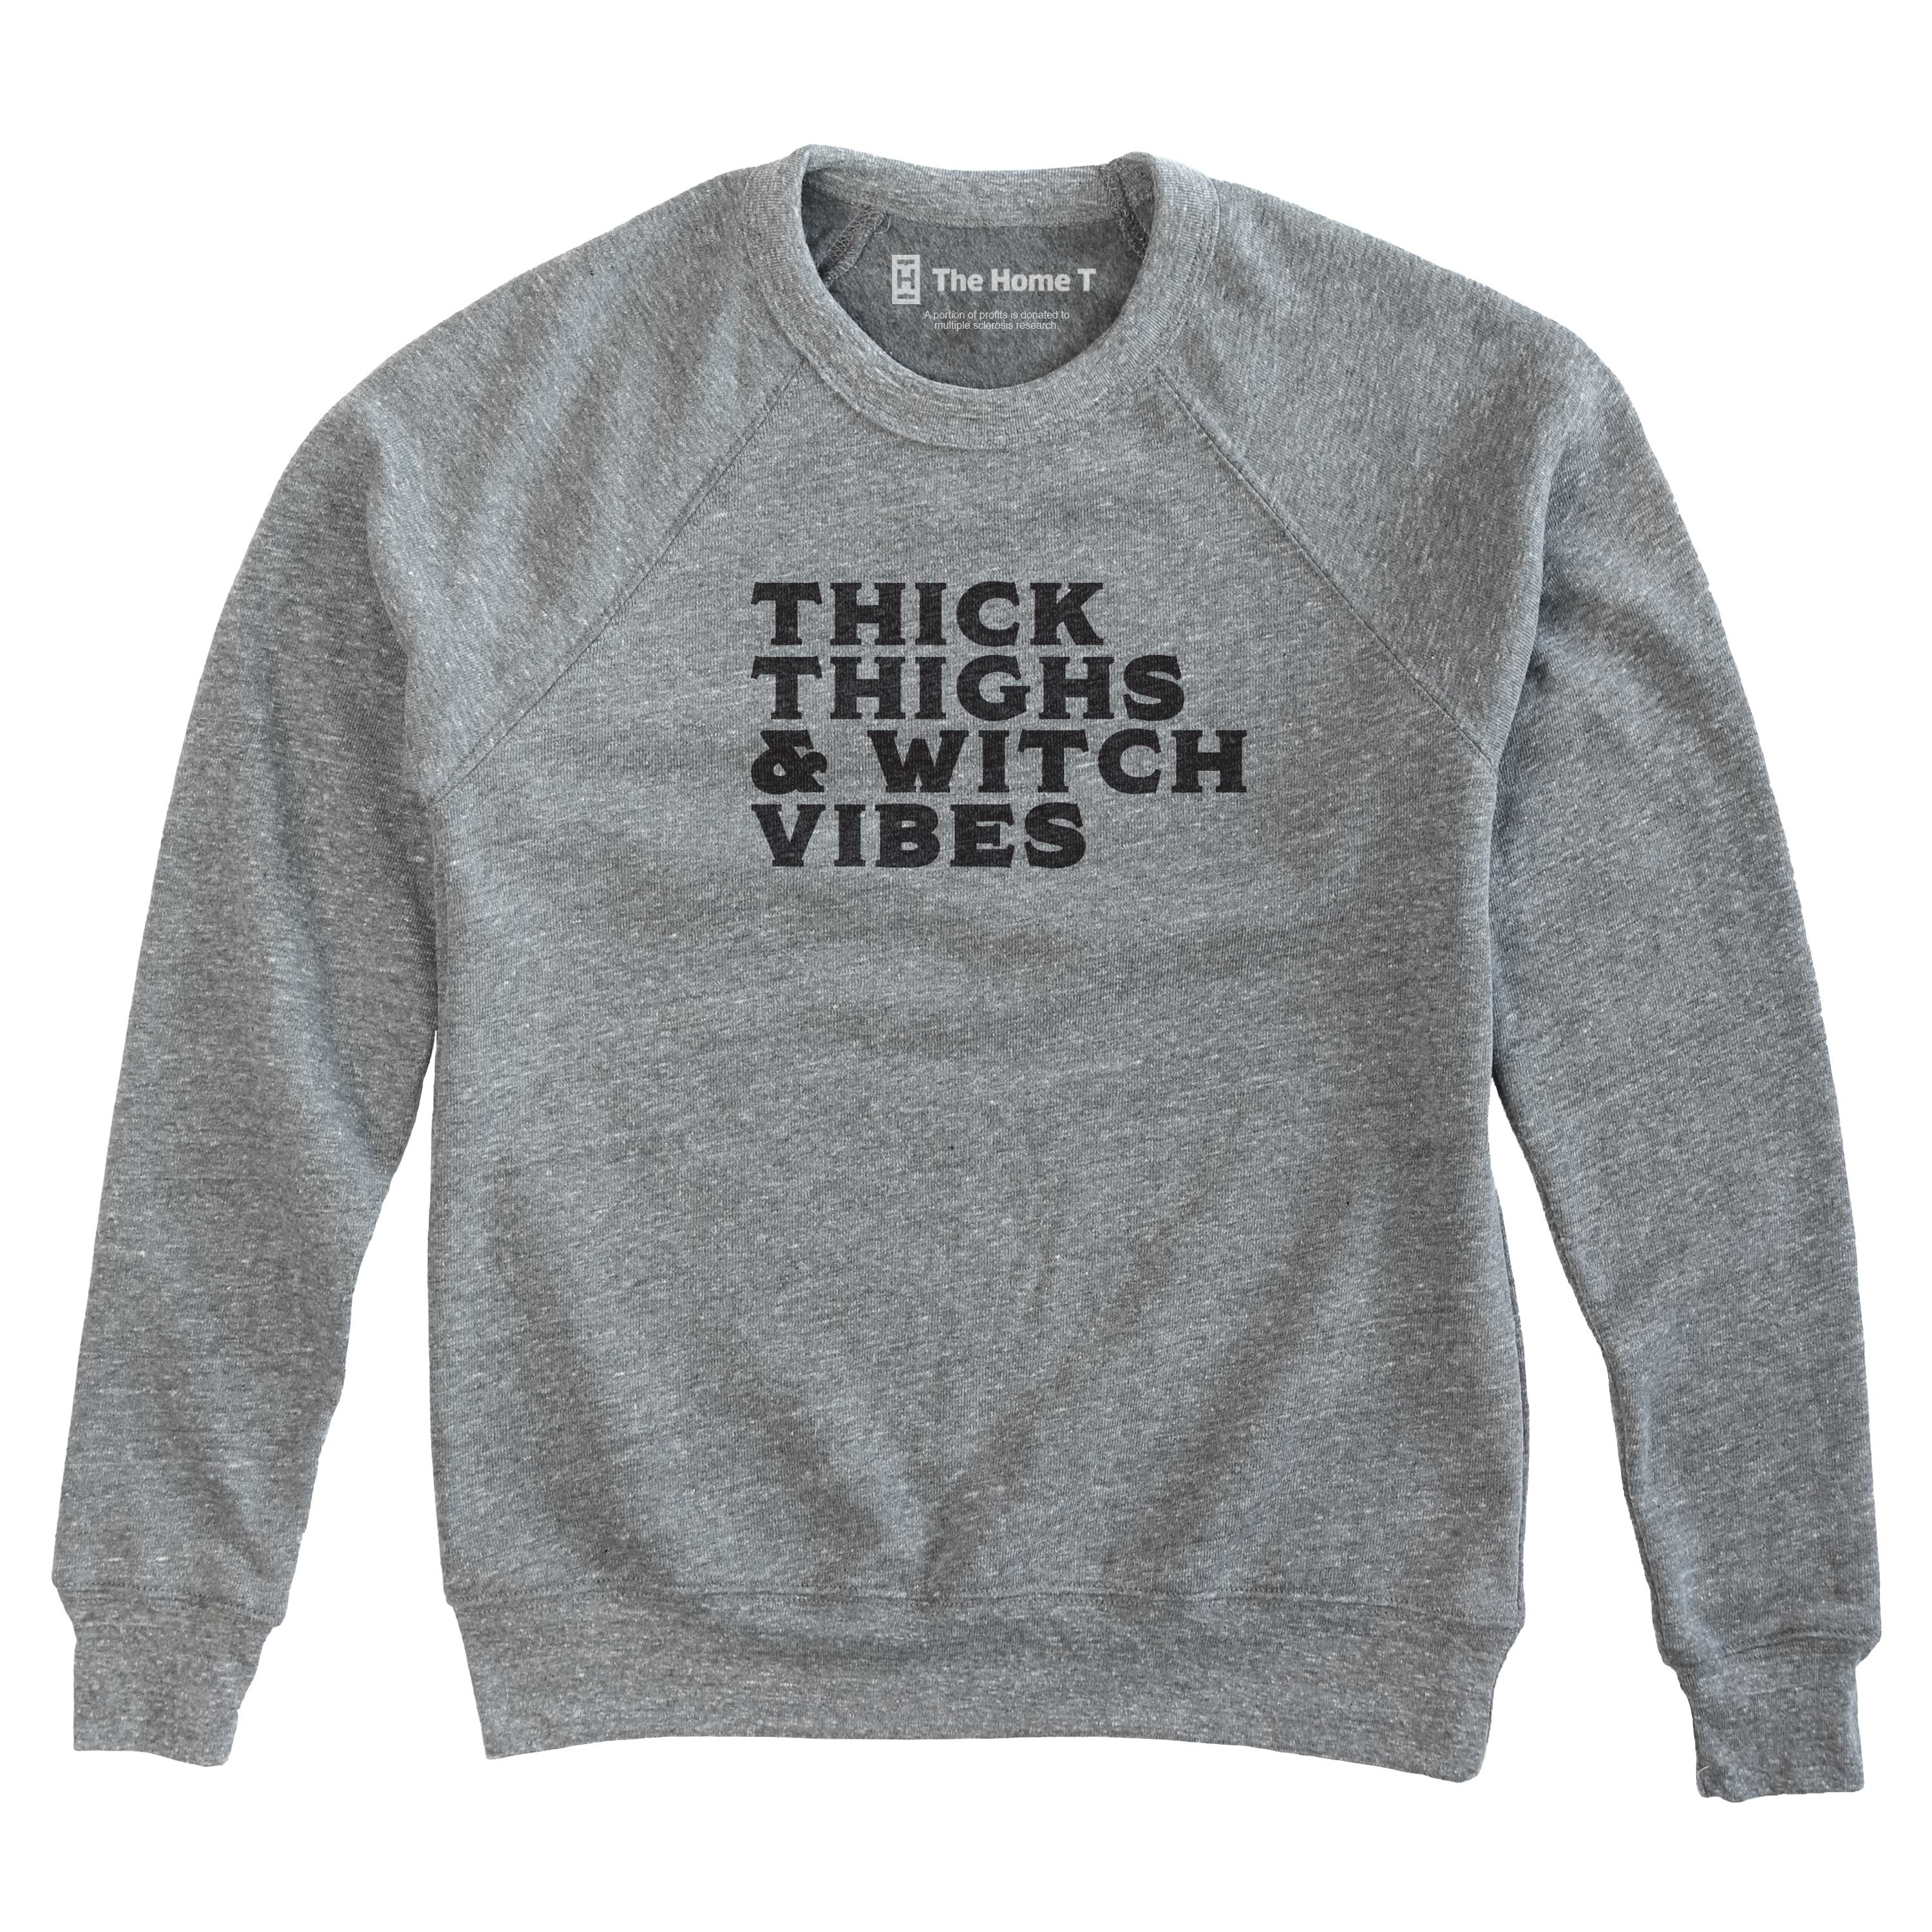 Thick Thighs, Witch Vibes Athletic Grey Sweatshirt